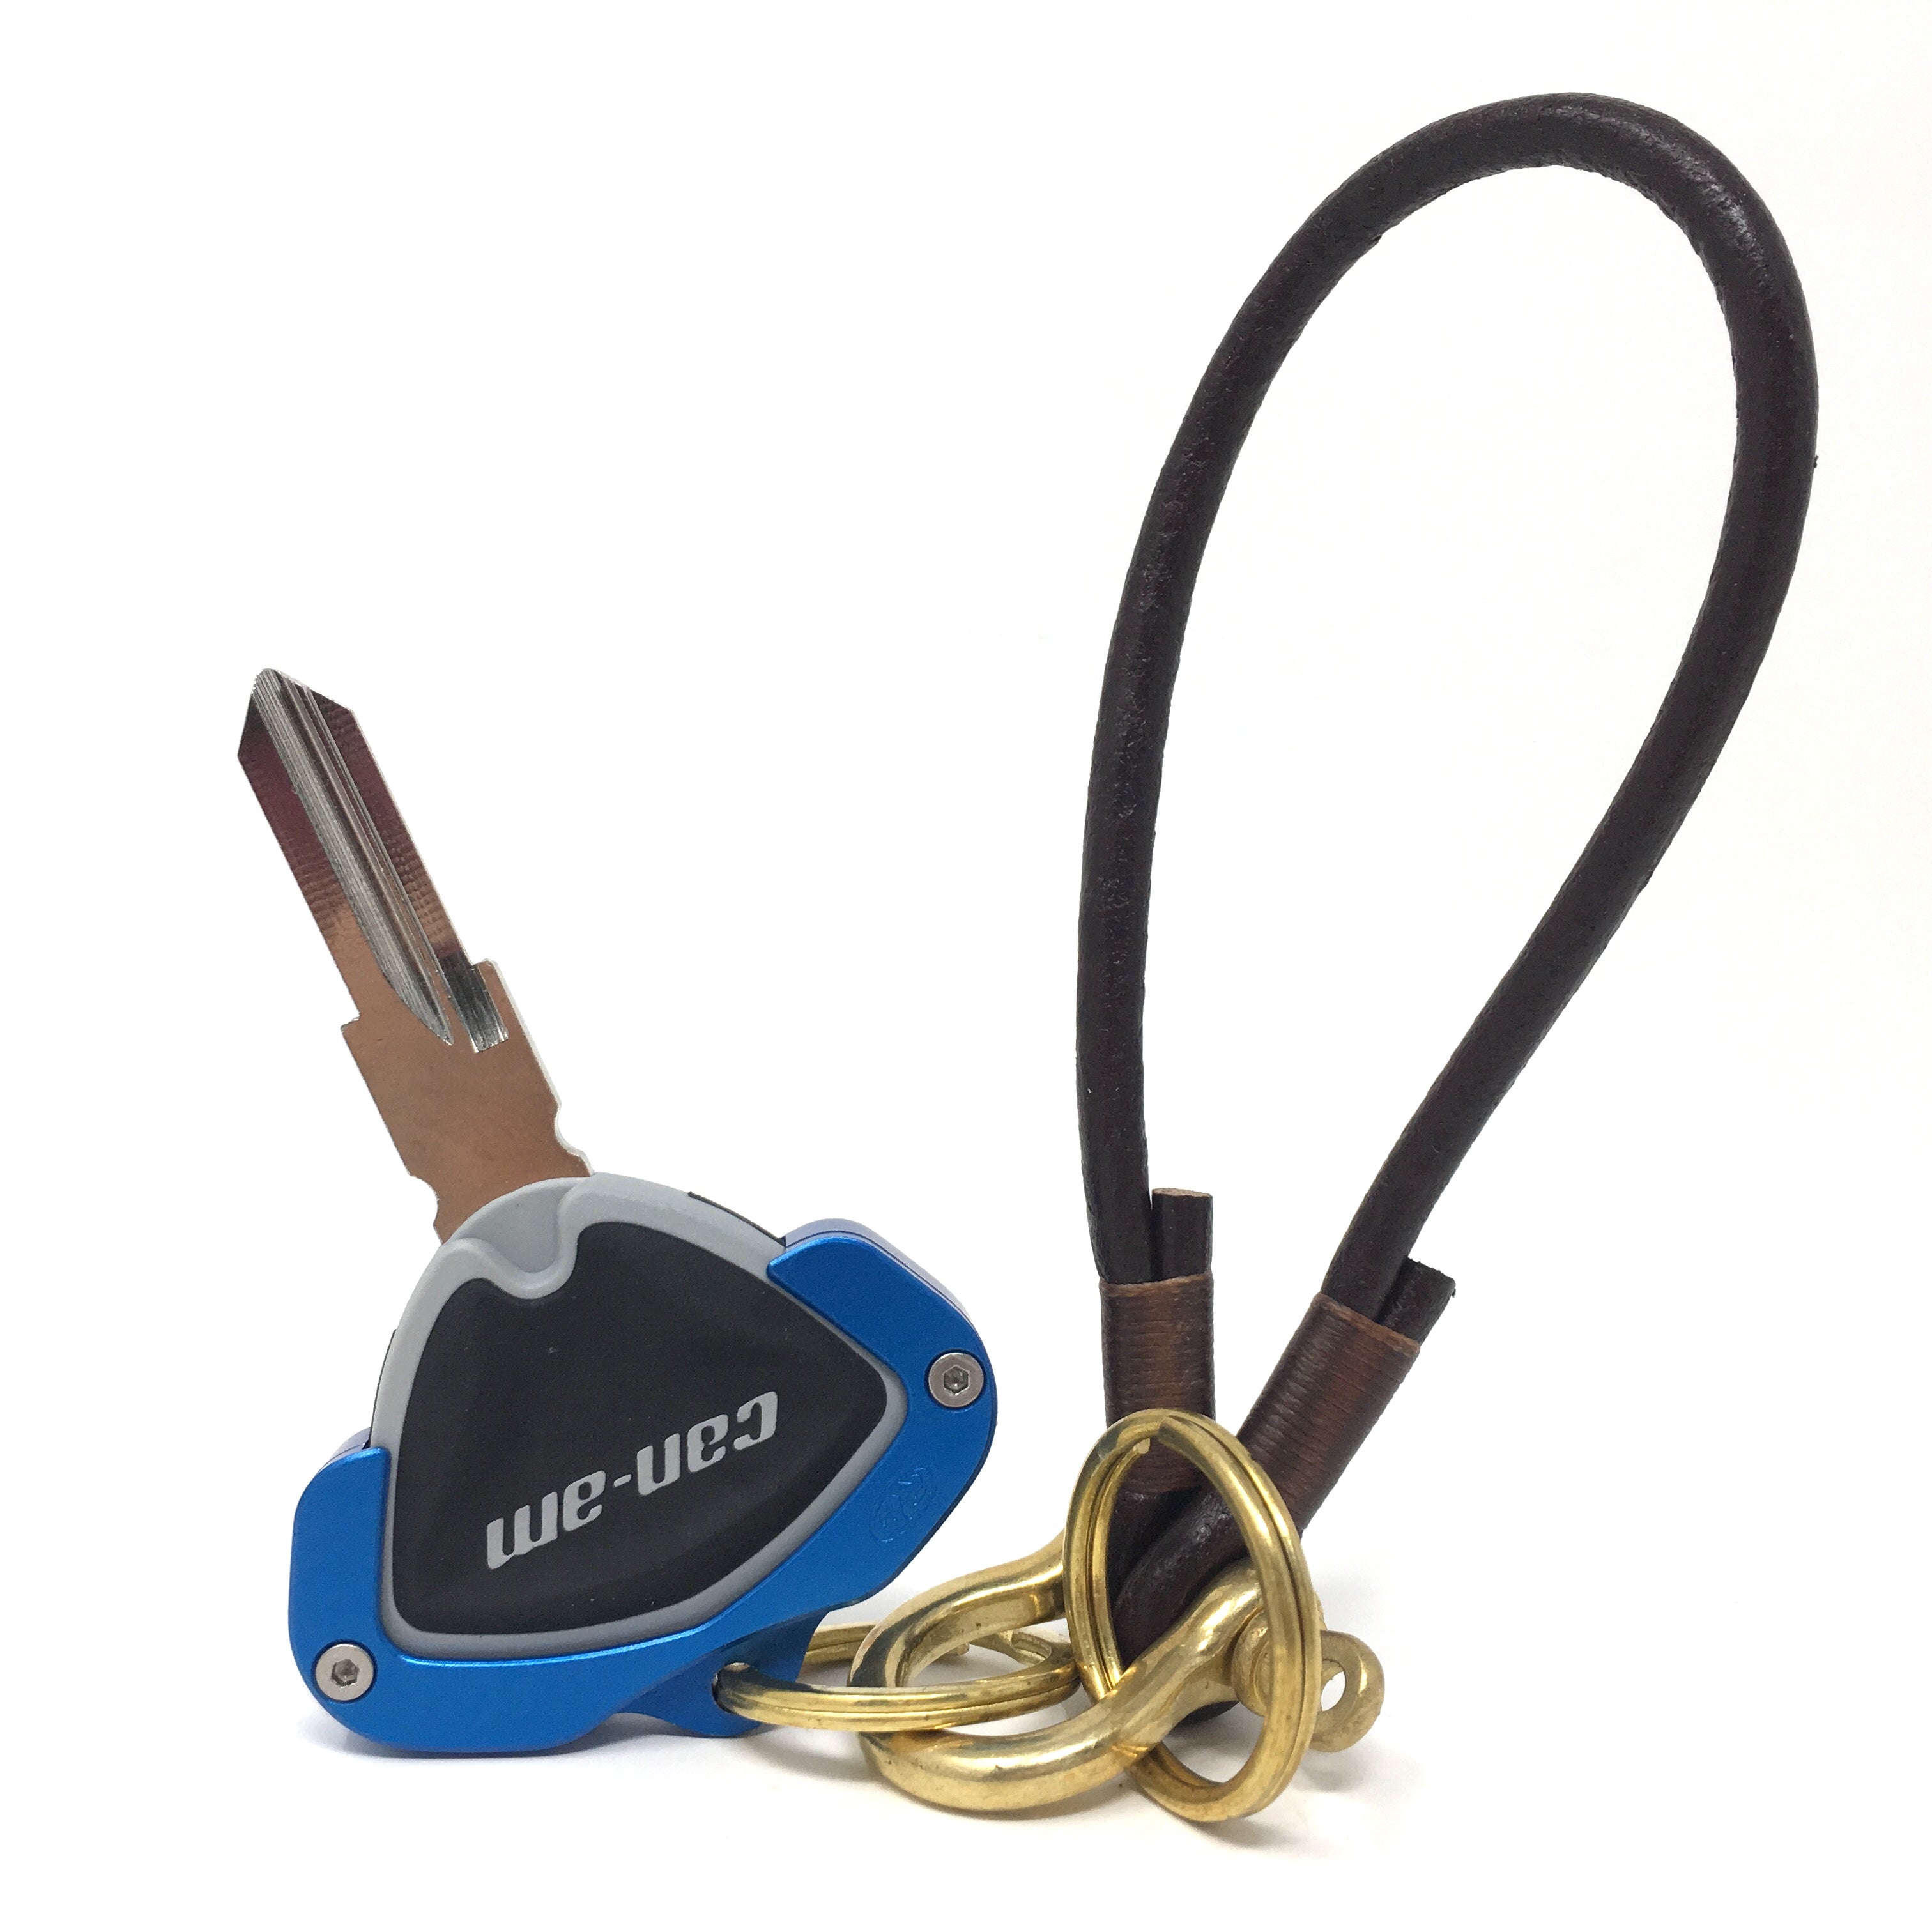 Key Holder For CAN-AM Spyder with Leather rope